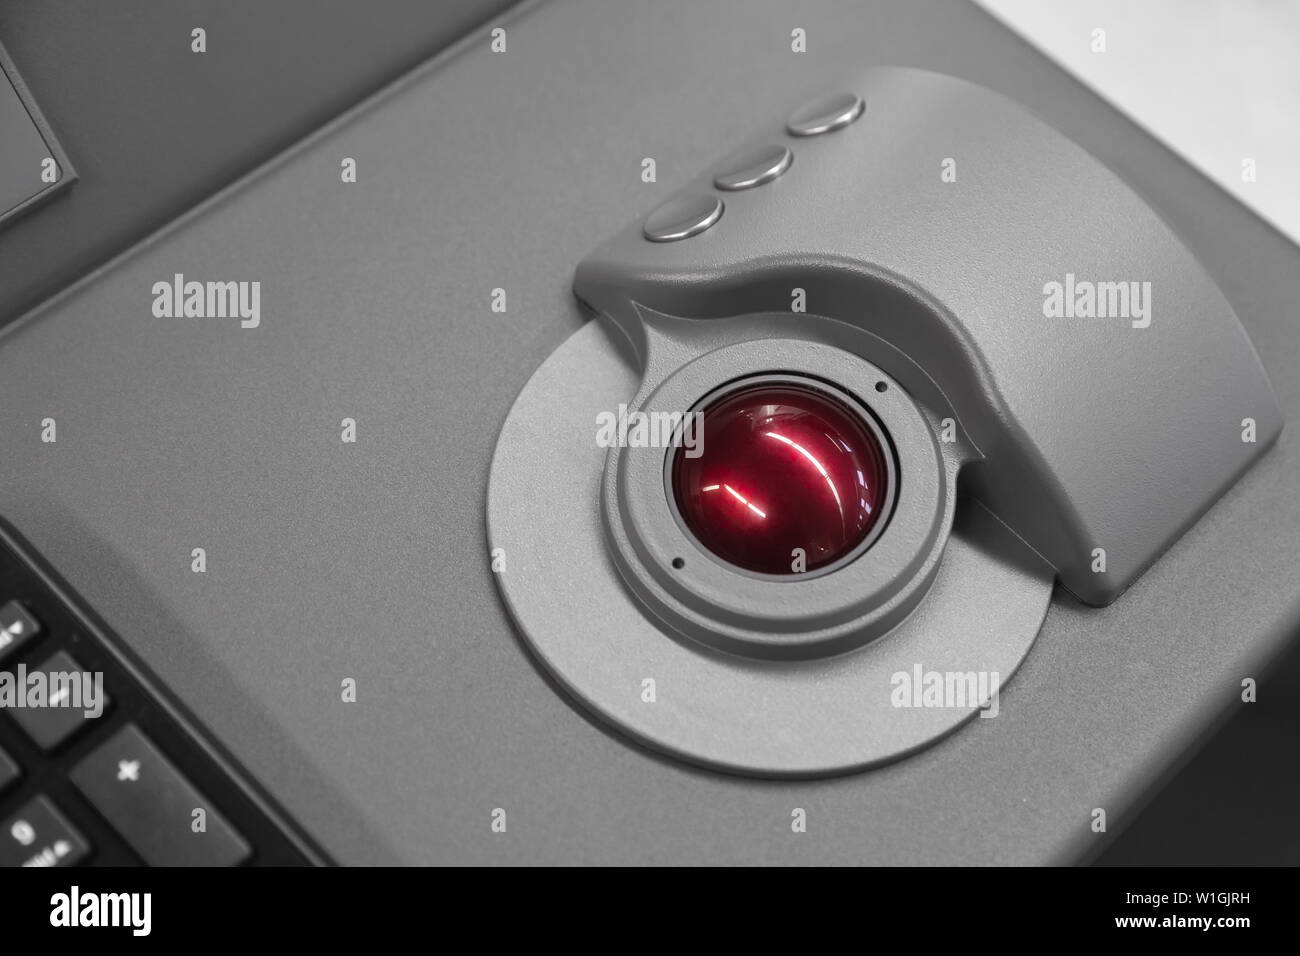 Industrial control panel made of gray steel with red trackball, close up photo with soft selective focus Stock Photo